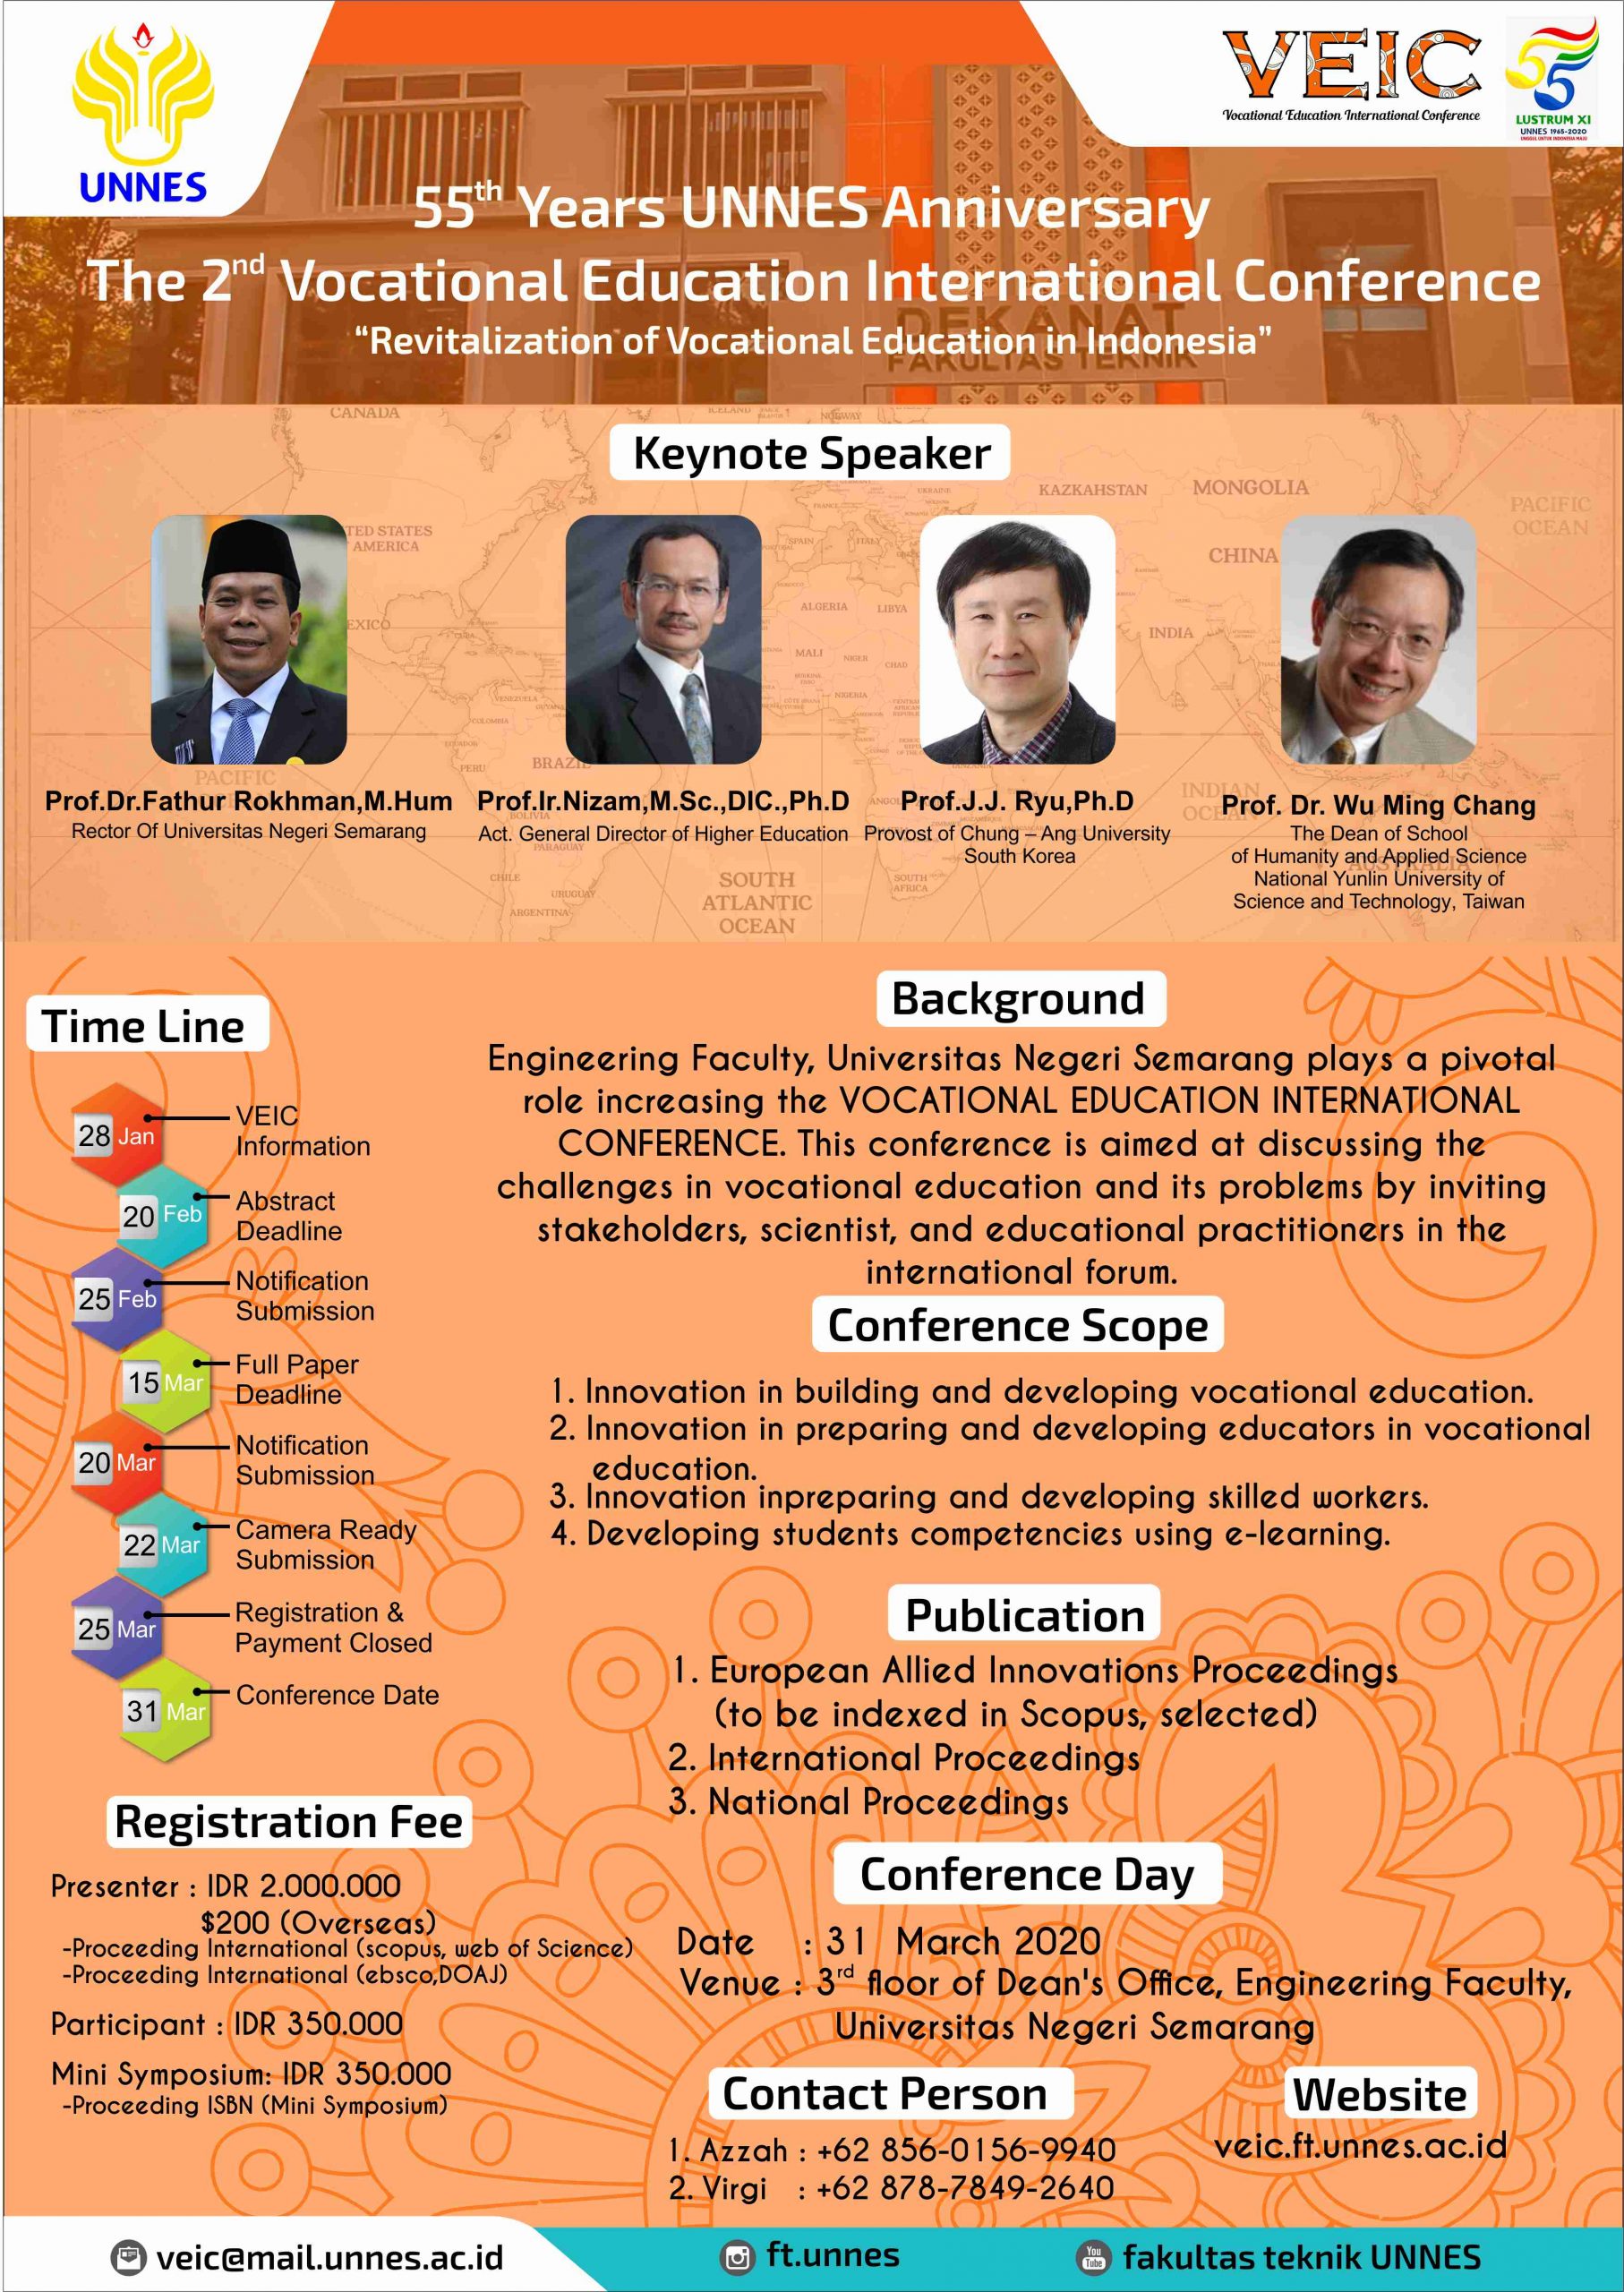 The 2nd Vocational Education International Conference VEIC 2020 – UNNES